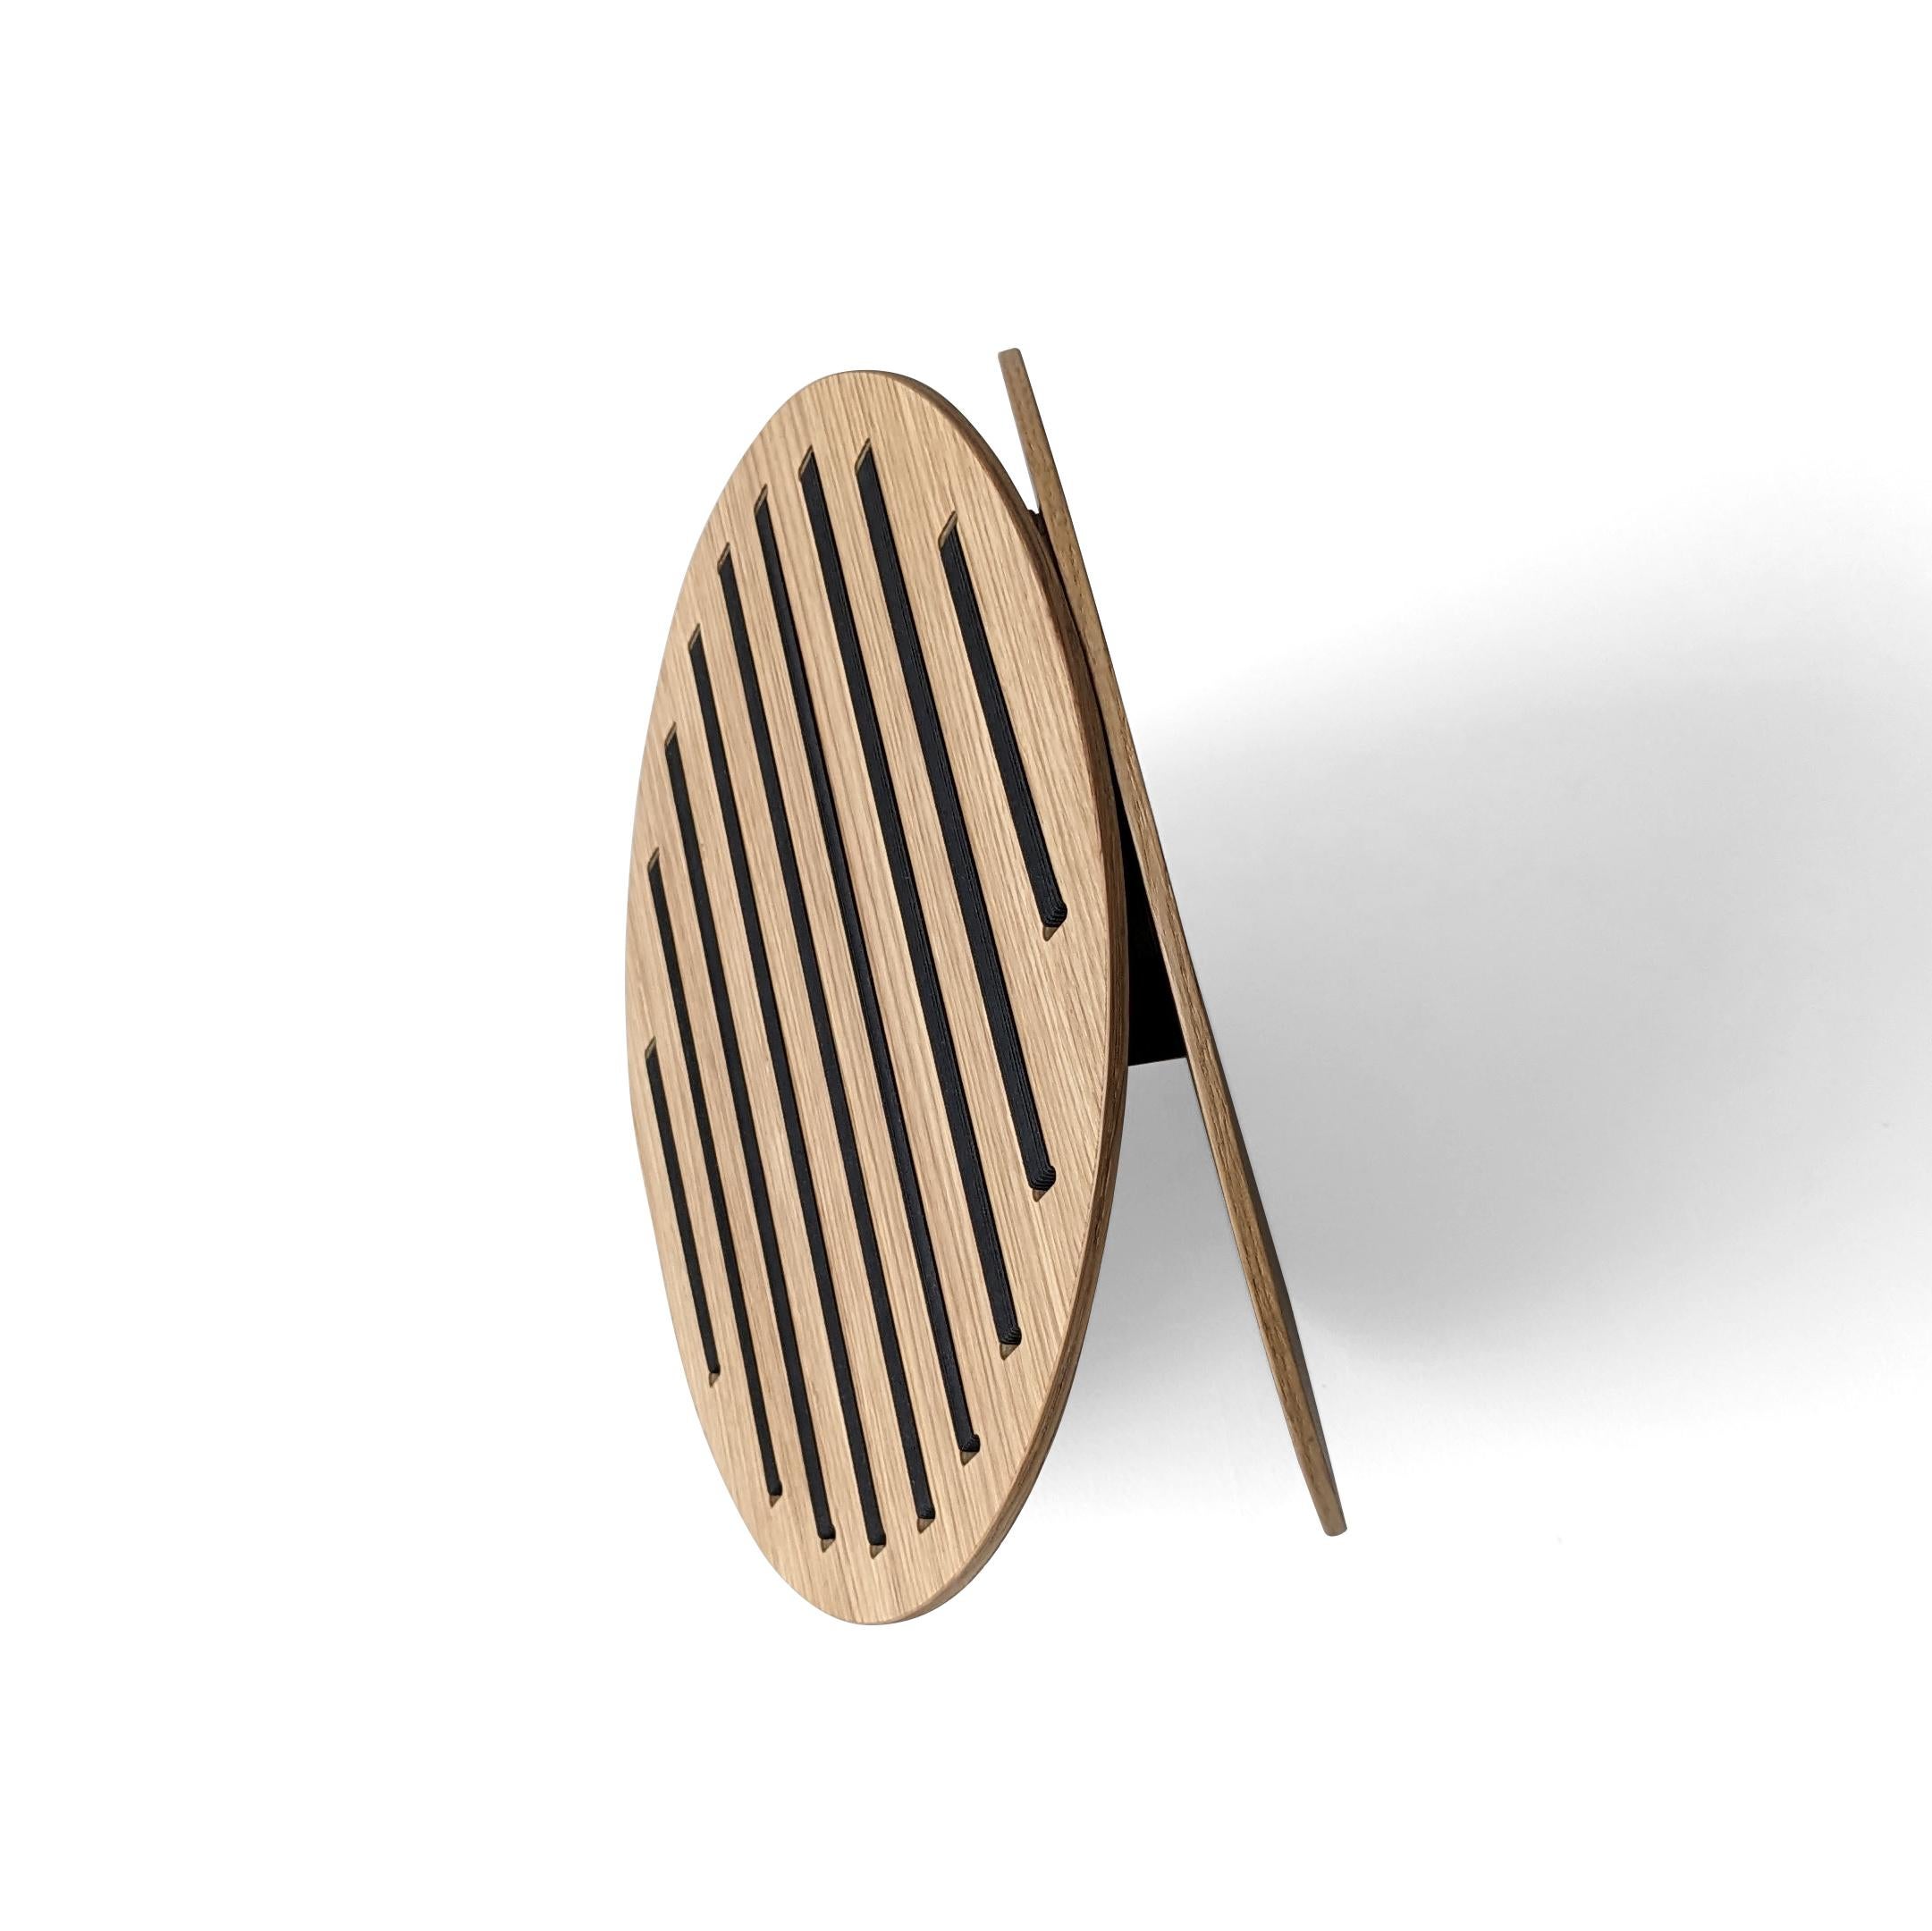 Modern Strip Table Wood - Display for Flat Objects by Lotti Gostic Studio For Sale